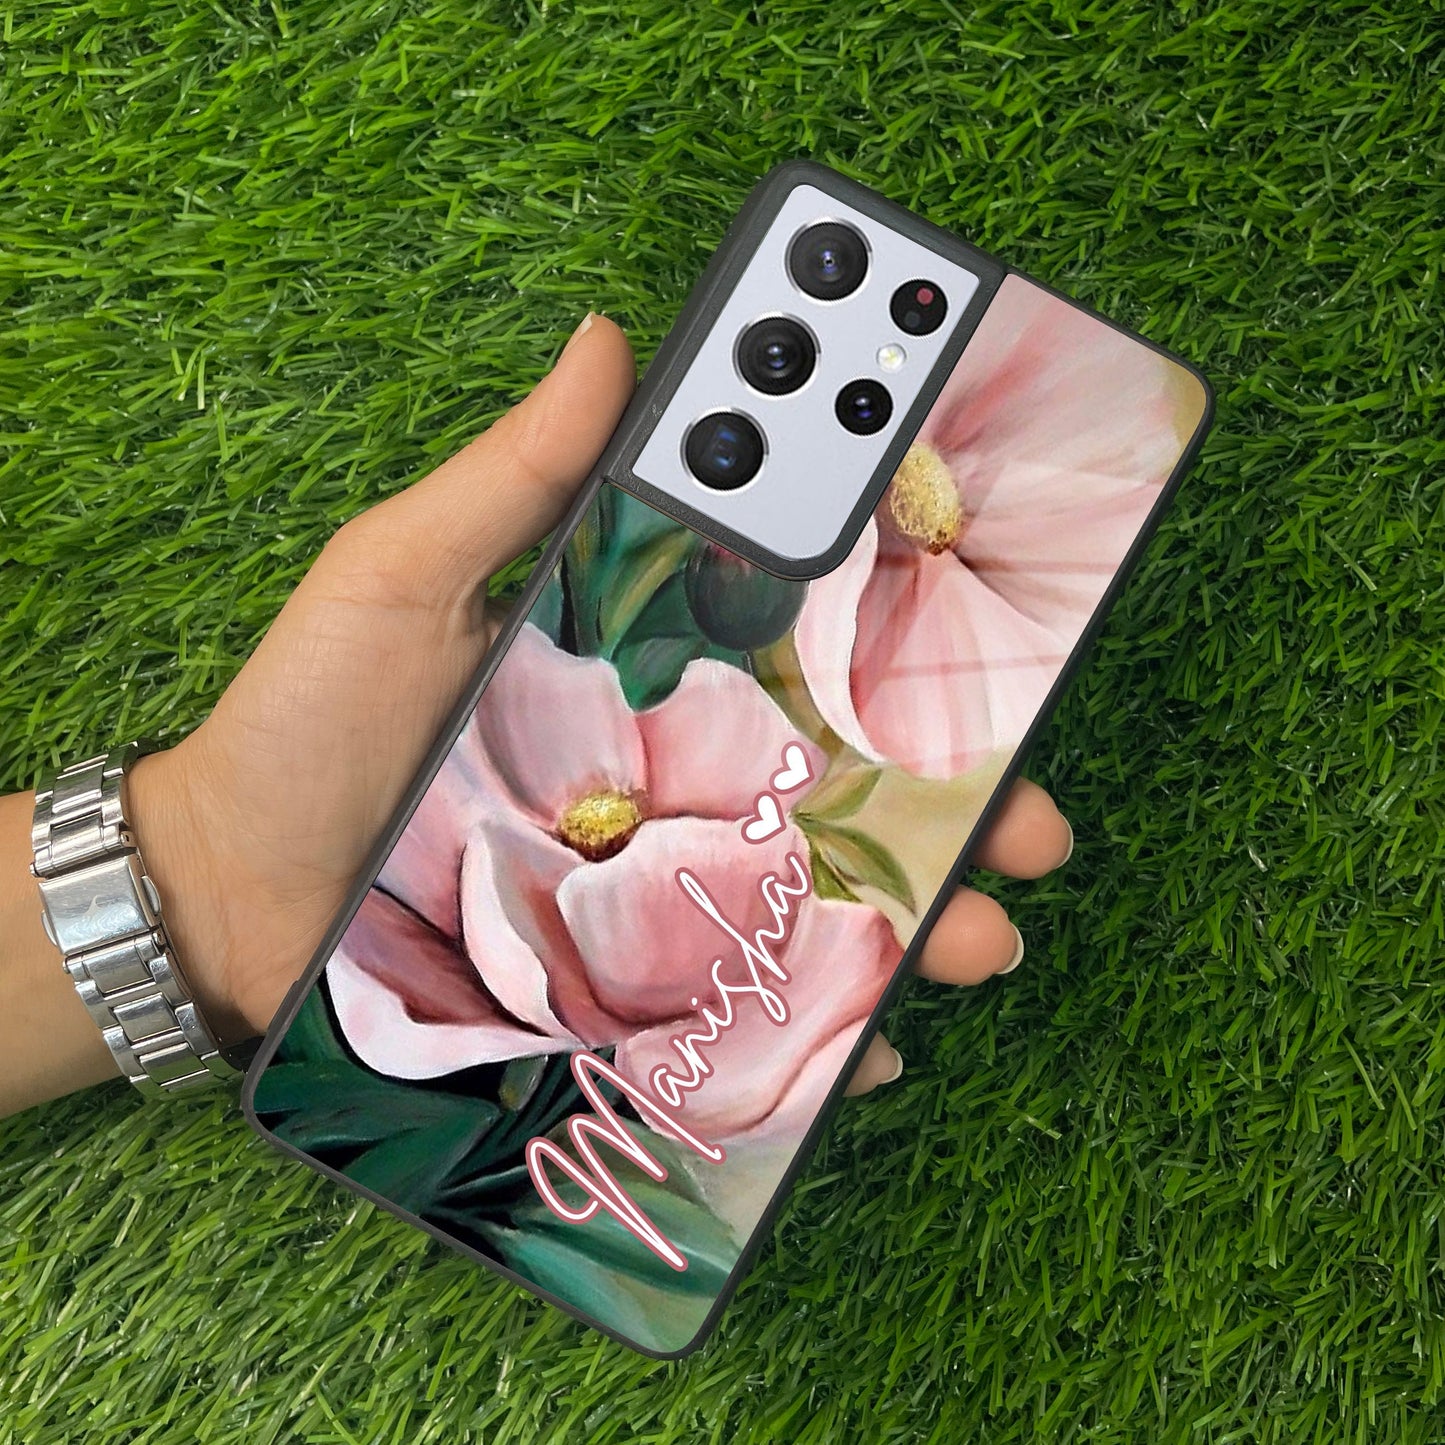 Paint Floral Poster Customize Glass Case Cover For Samsung